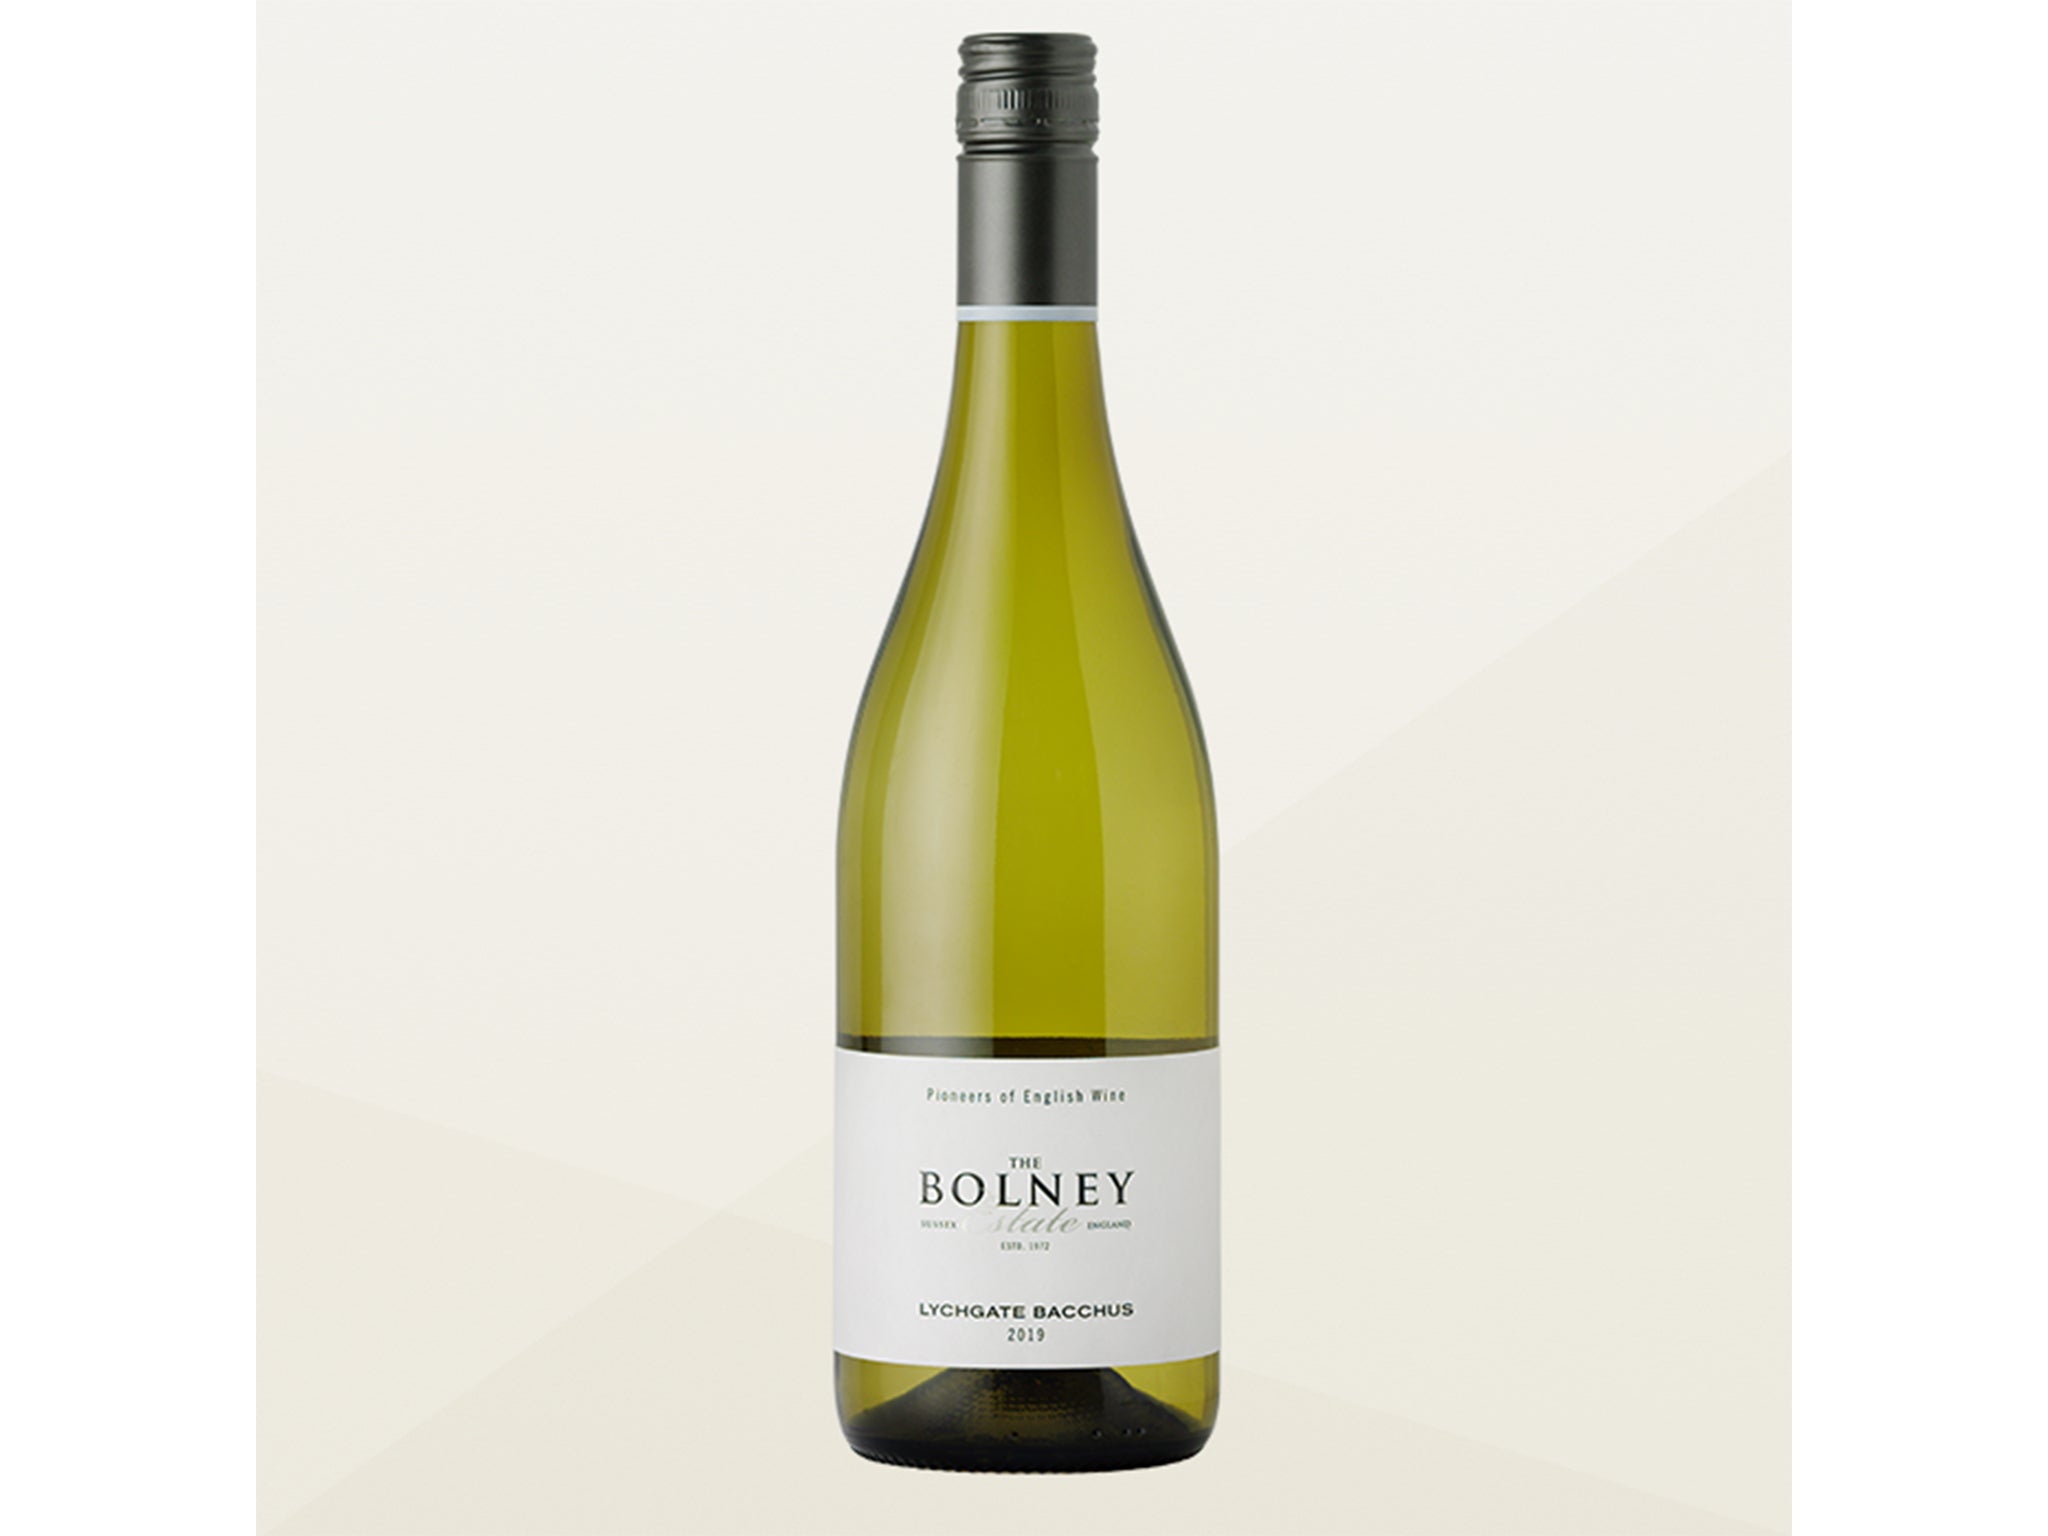 Based in the South Downs, Bolney has a long family history of producing high-quality wines